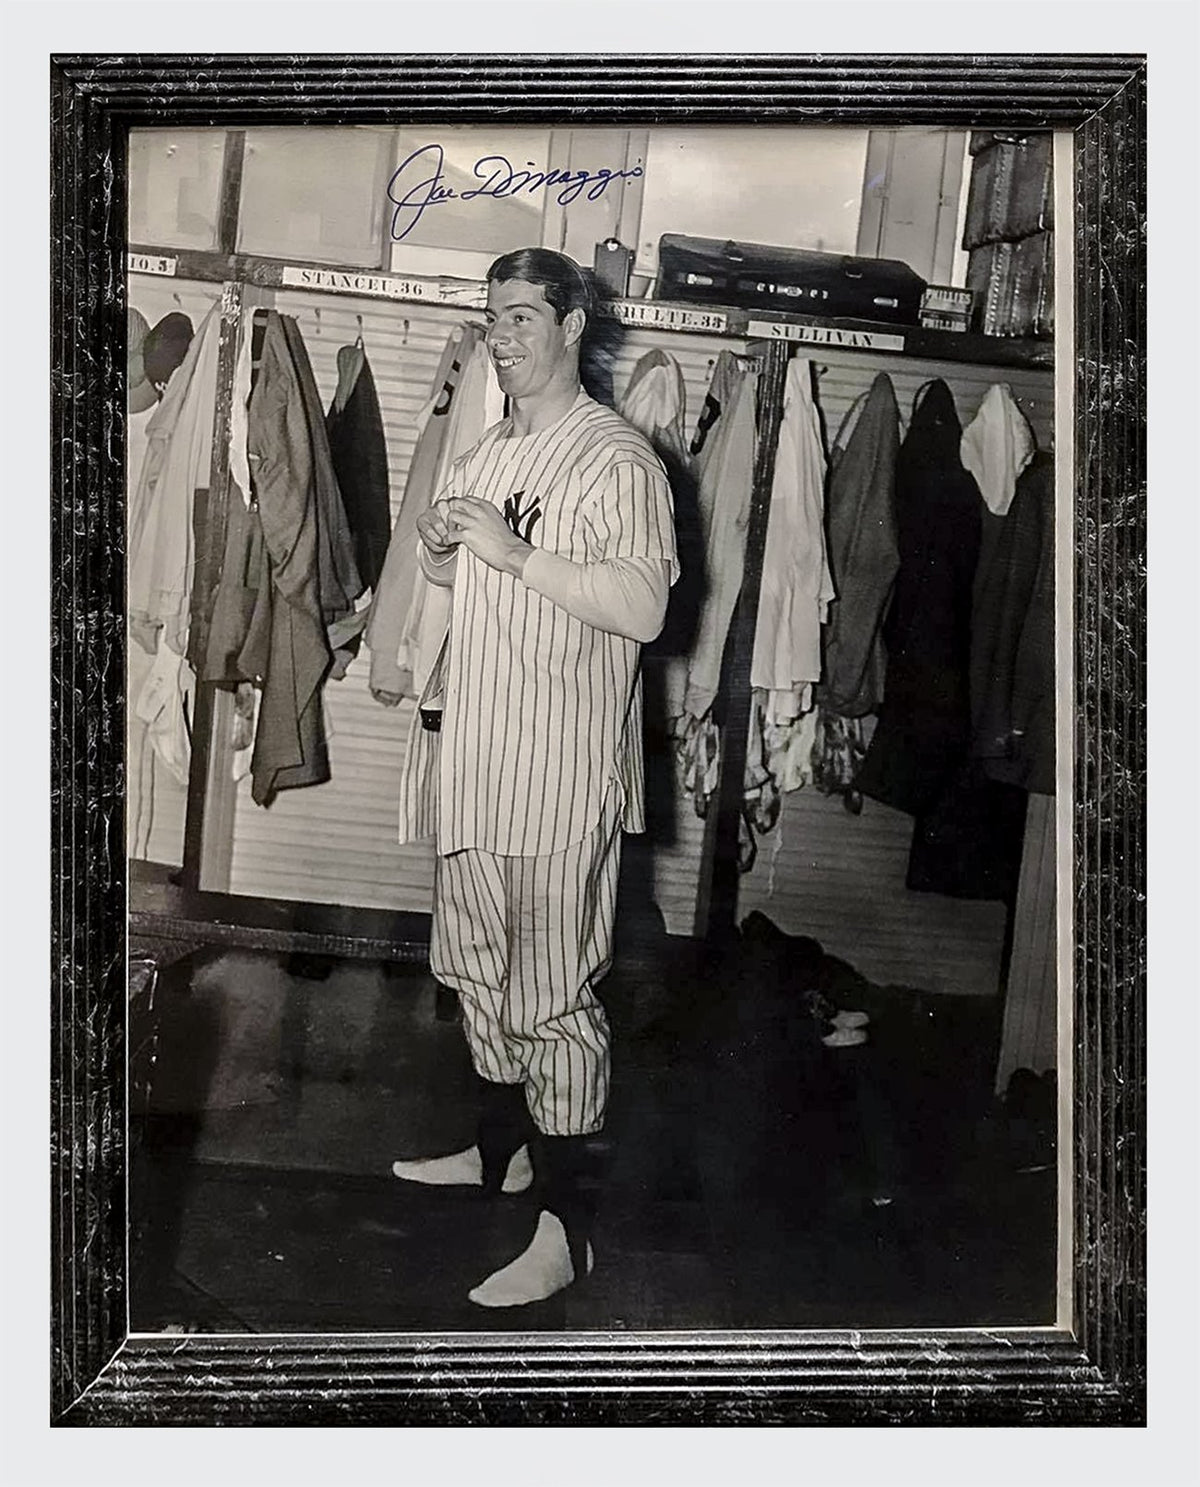 Collectible & Autographed Baseball Photographs